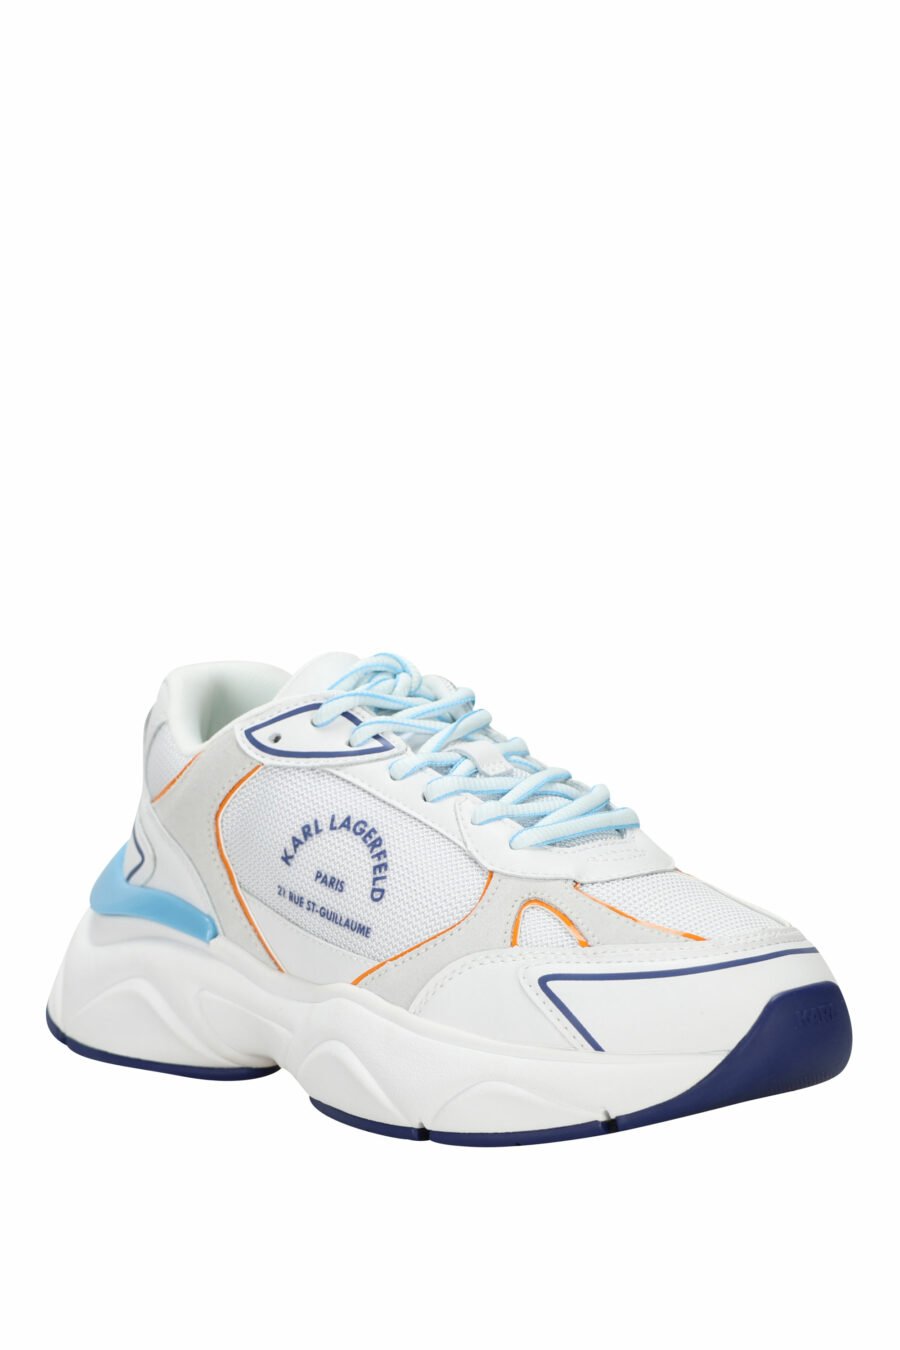 Muticolour mix "komet" trainers with logo - 5059529398940 1